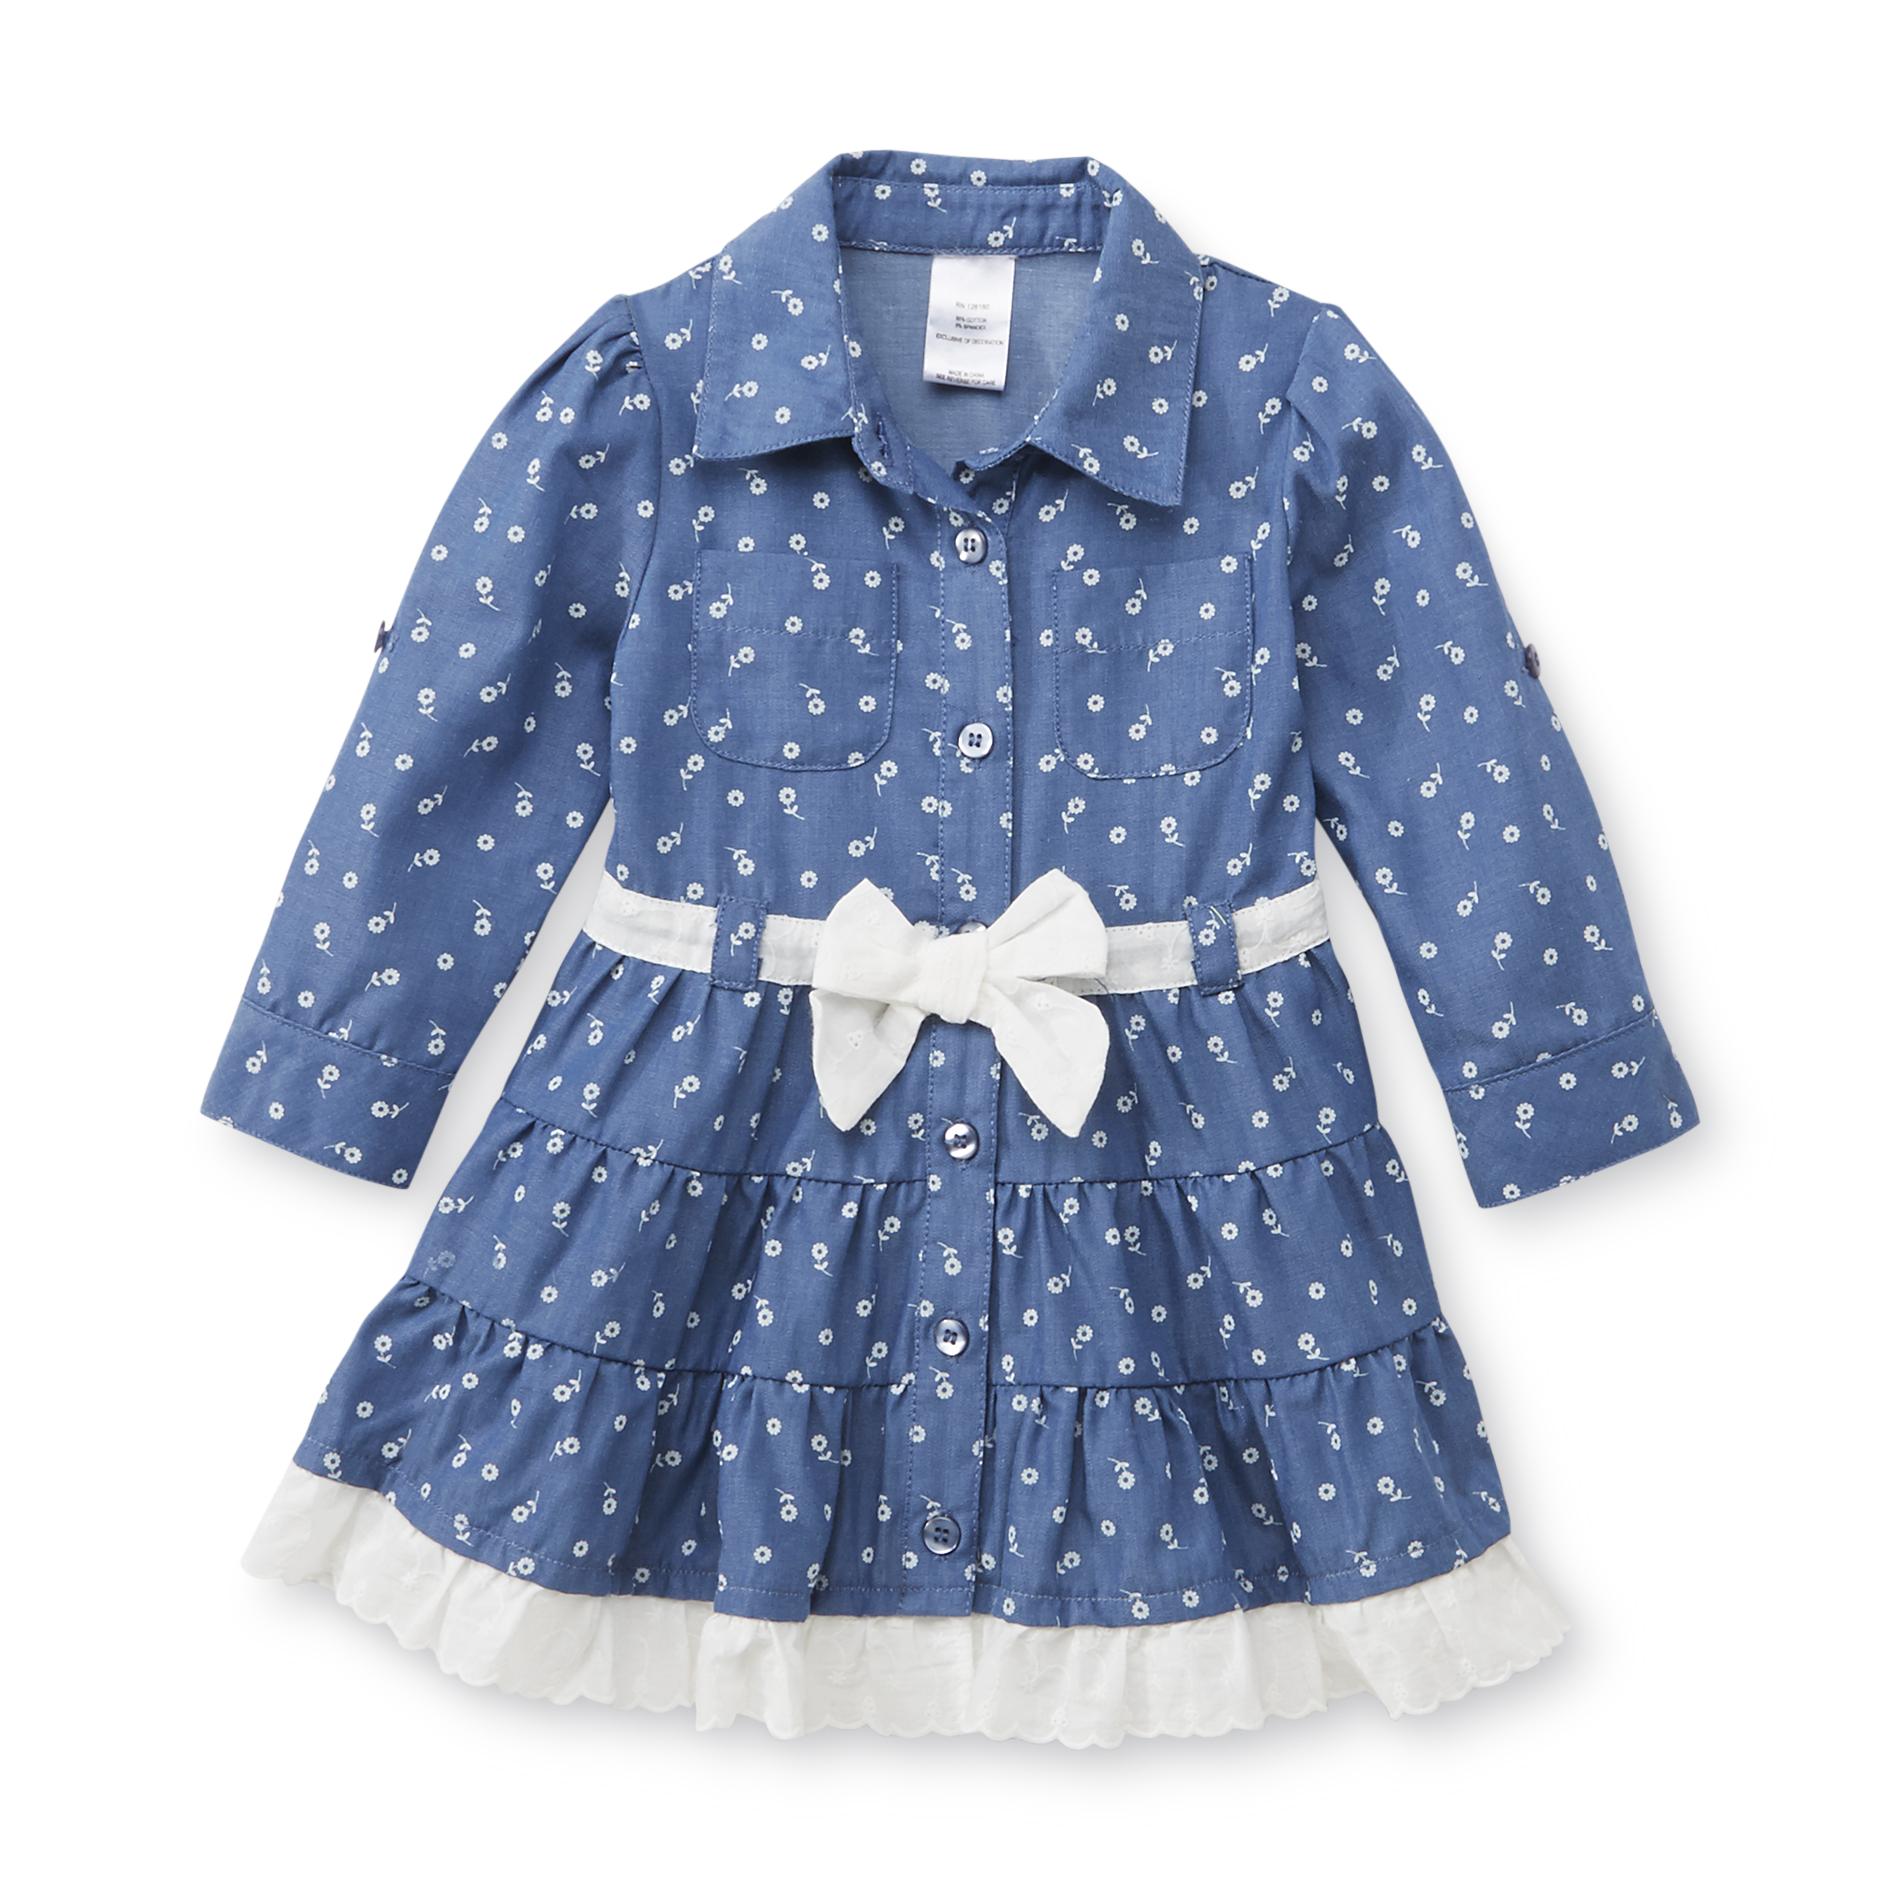 Route 66 Infant & Toddler Girl's Chambray Shirt Dress - Floral